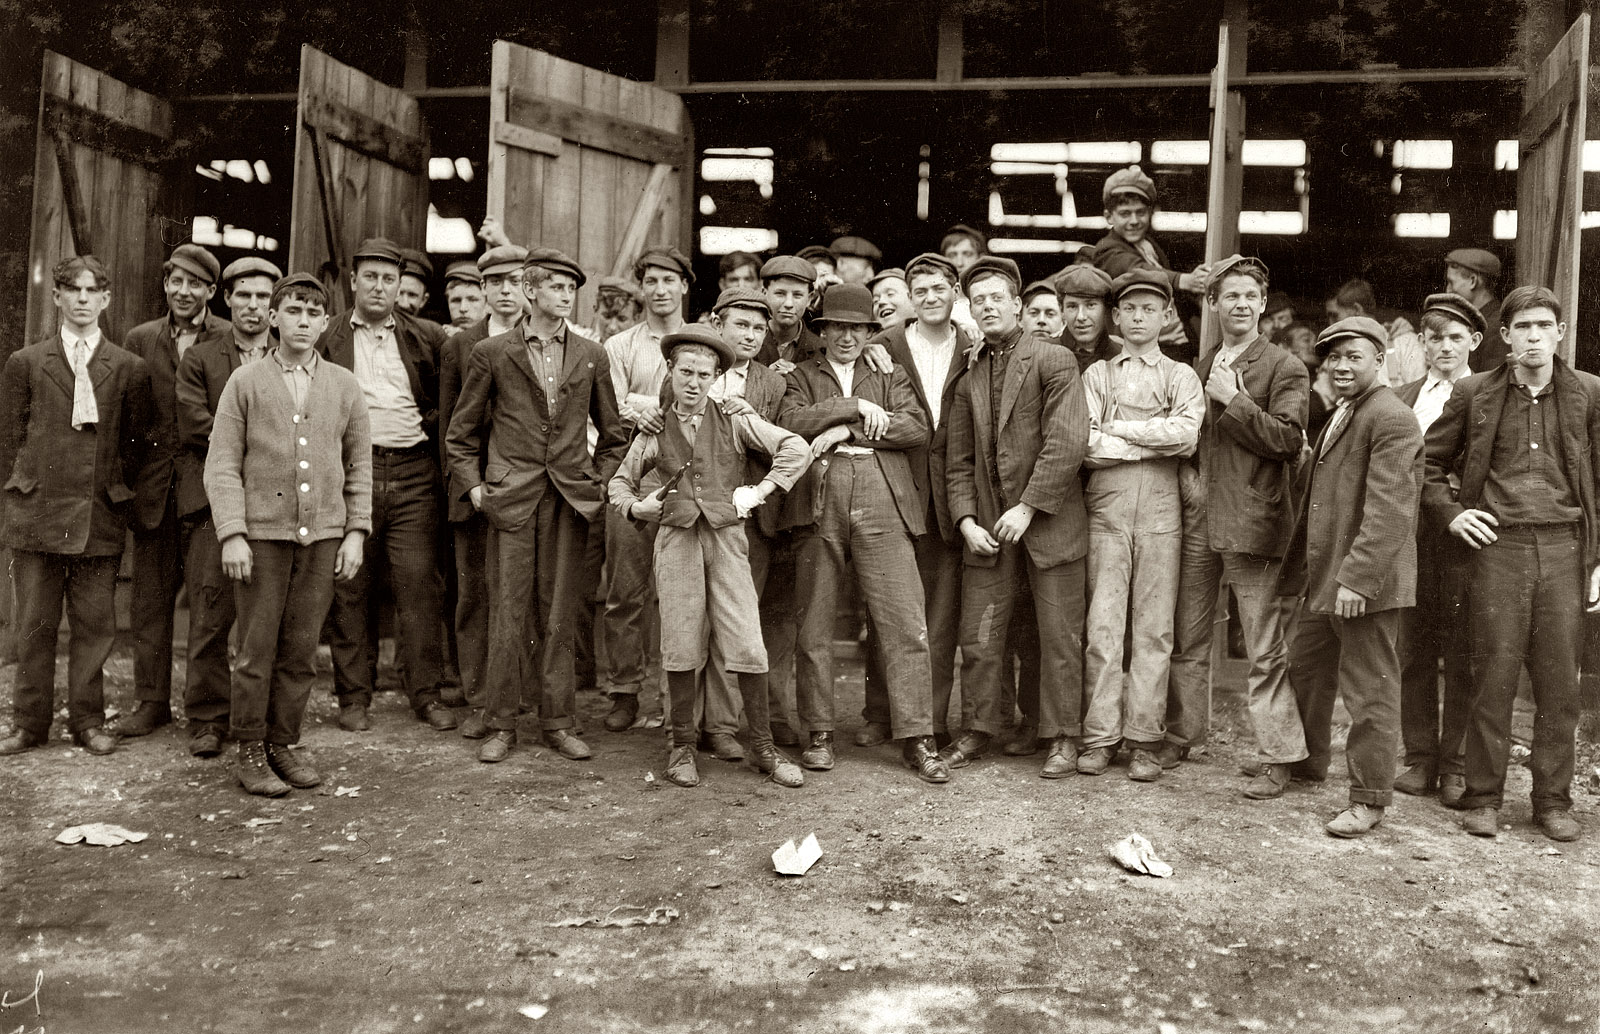 Workers at the More-Jones Glass Co. in Bridgeton, N.J. Small boy in the middle is Harry Simpkins. The photograph is by Lewis Wickes Hine, who described the work conditions as, "dirty, noisome." November 1909. View full size.